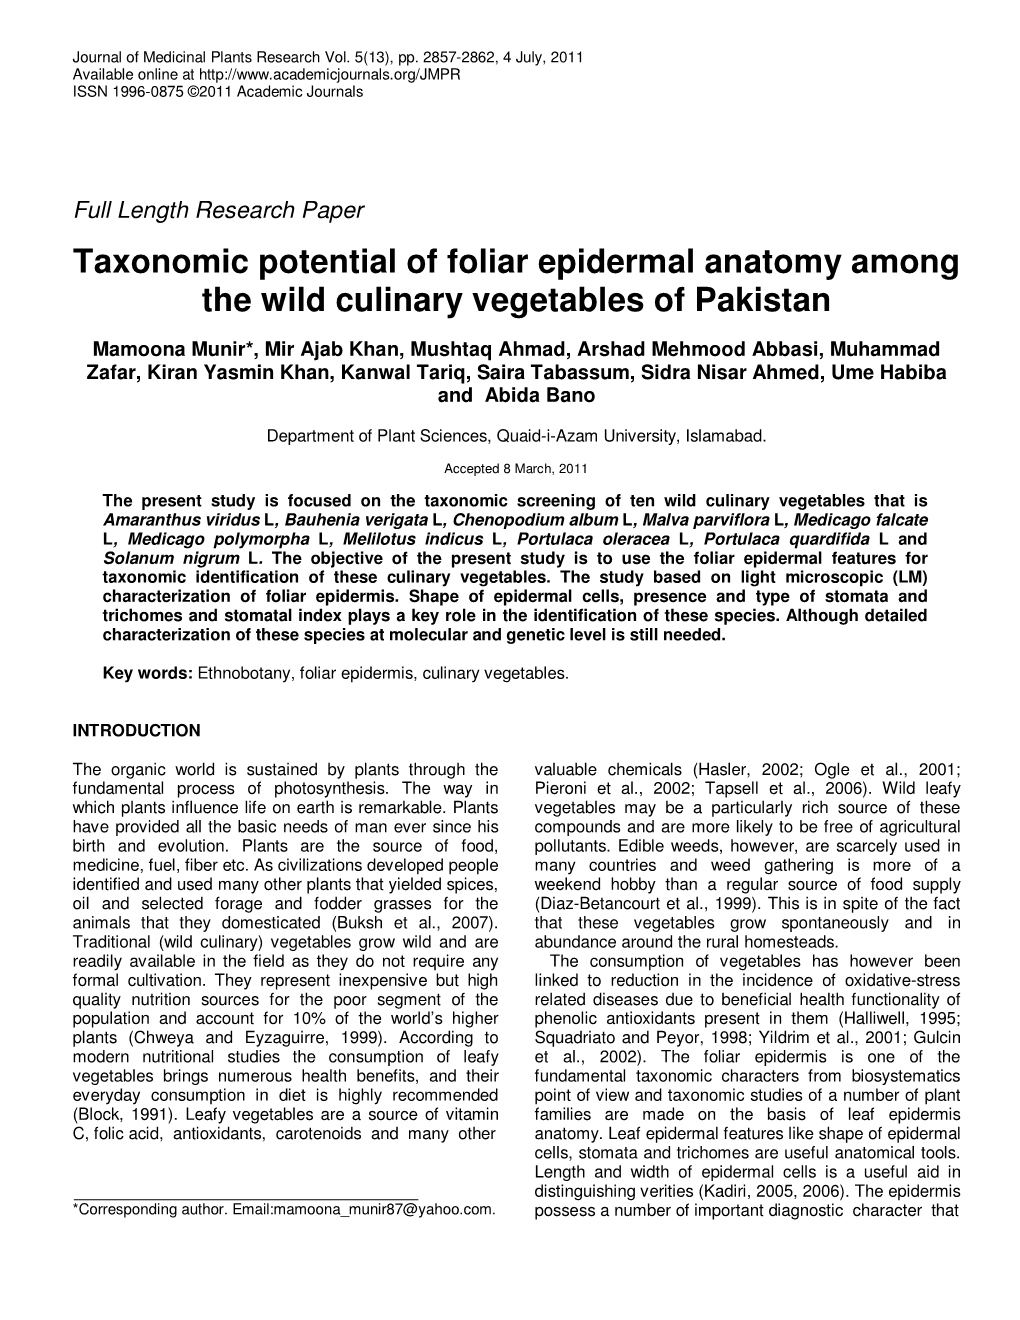 Taxonomic Potential of Foliar Epidermal Anatomy Among the Wild Culinary Vegetables of Pakistan